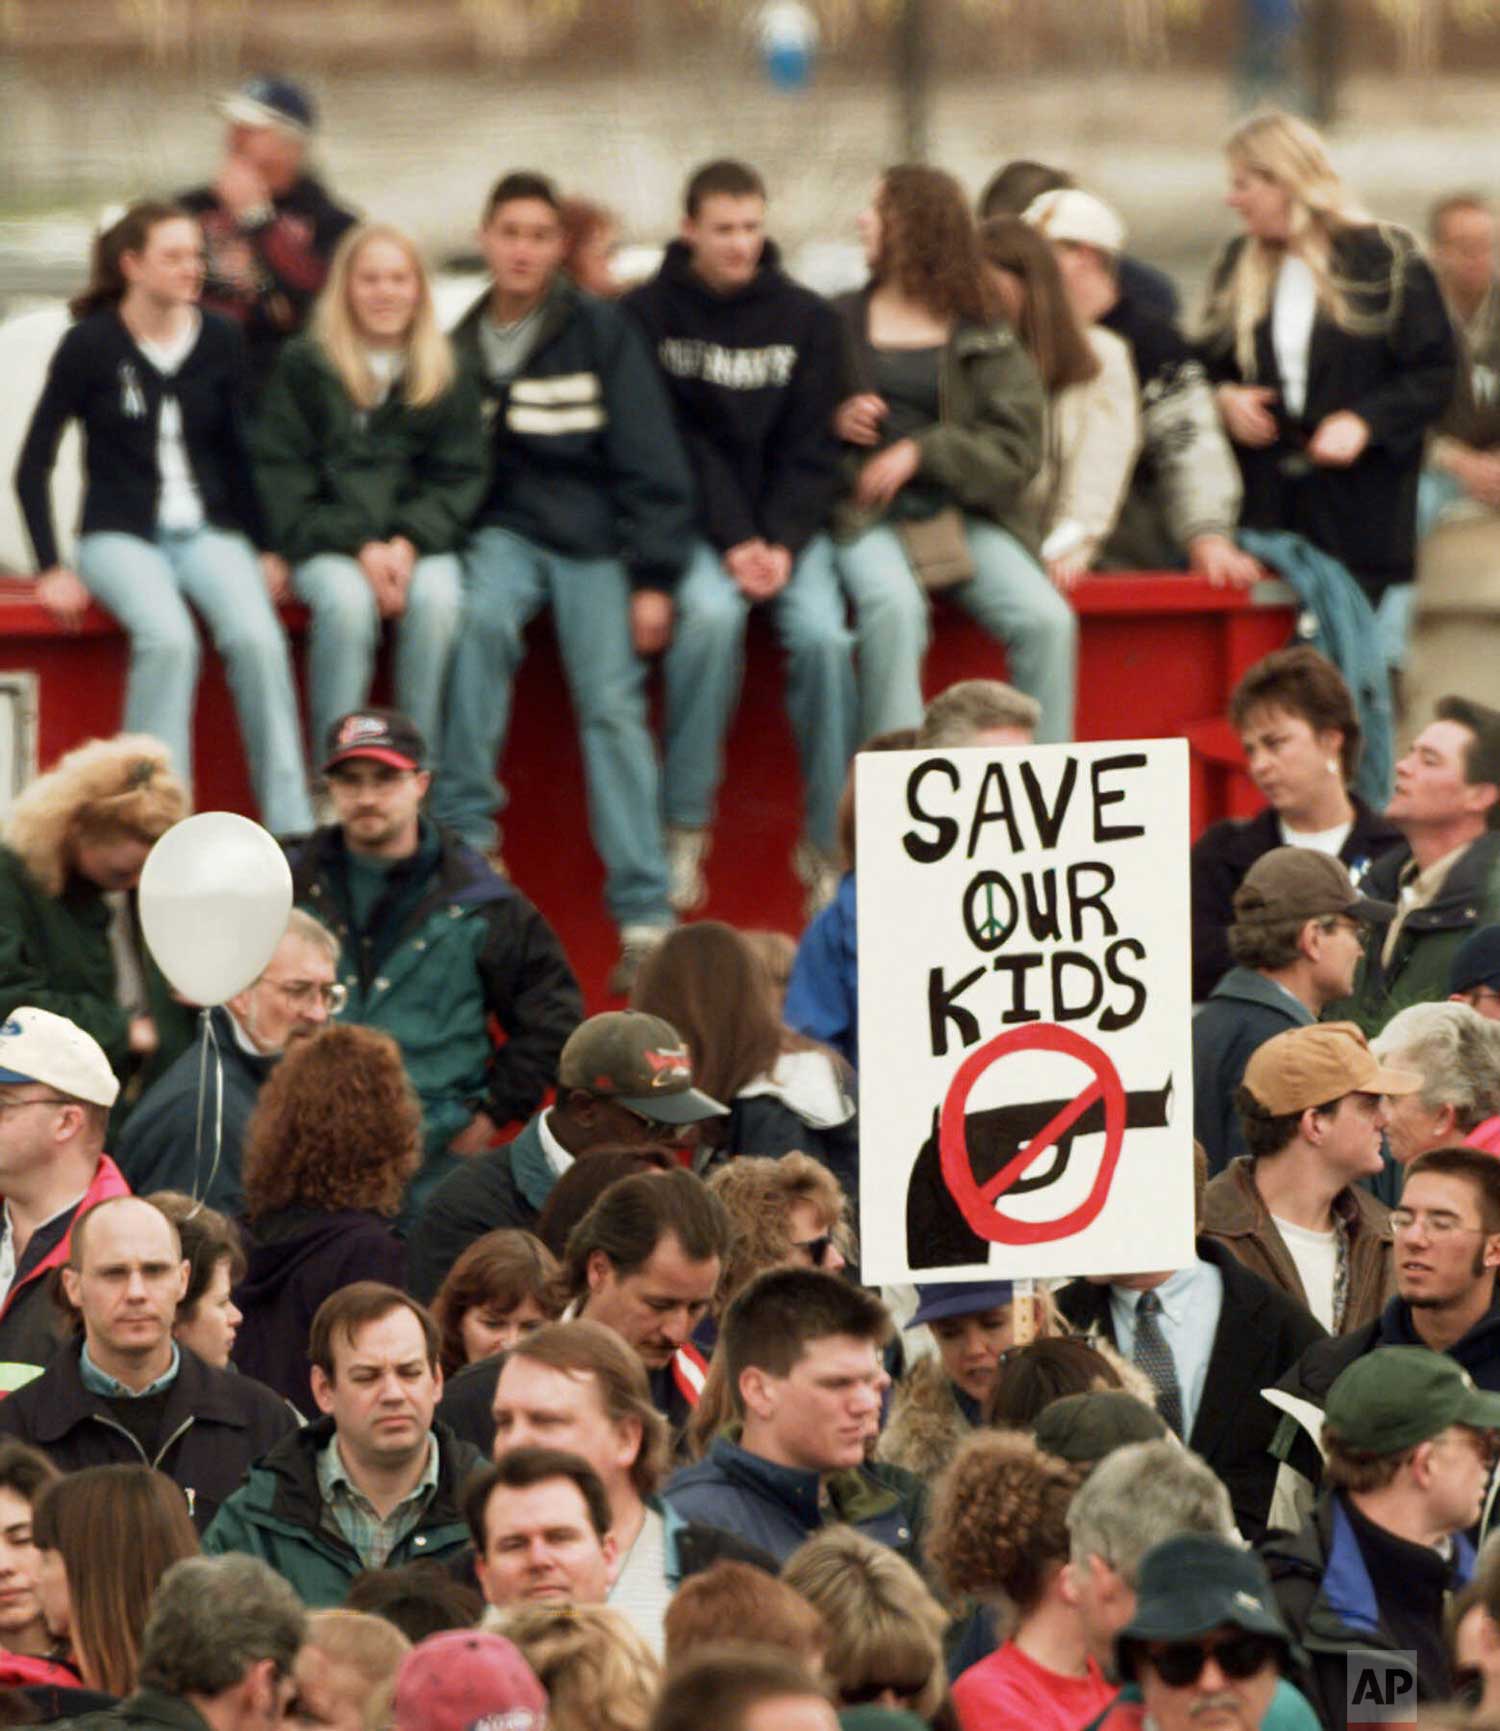  A participant at a memorial service for the victims of the Columbine High School shooting rampage holds a "NO GUNS" sign in Littleton, Colo., on Sunday, April 25, 1999.  (AP Photo/Eric Gay) 